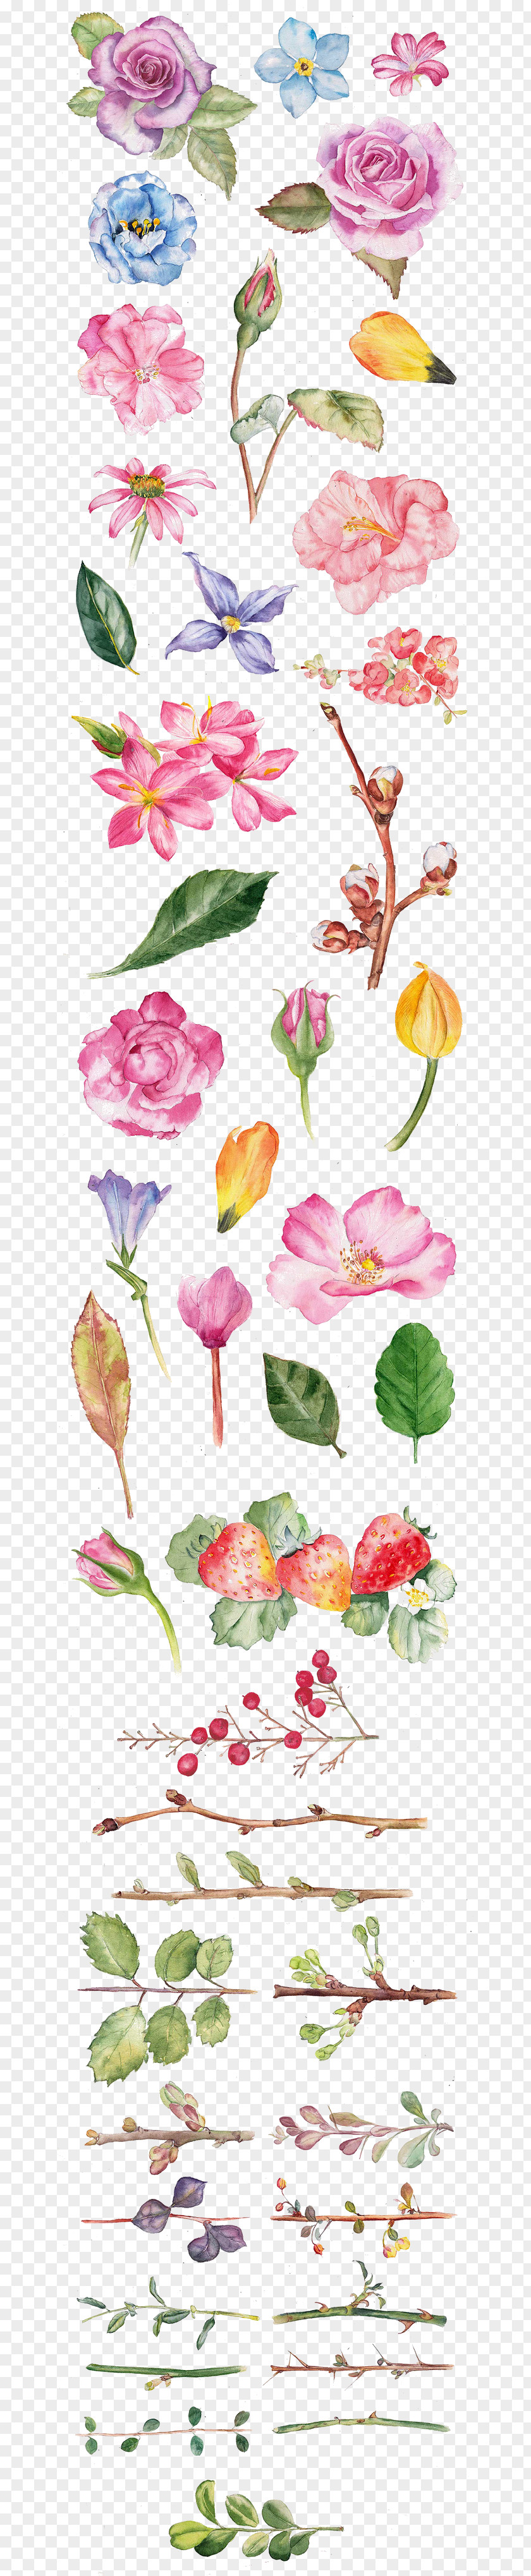 Rose Watercolor Painting Flower Drawing Illustration PNG